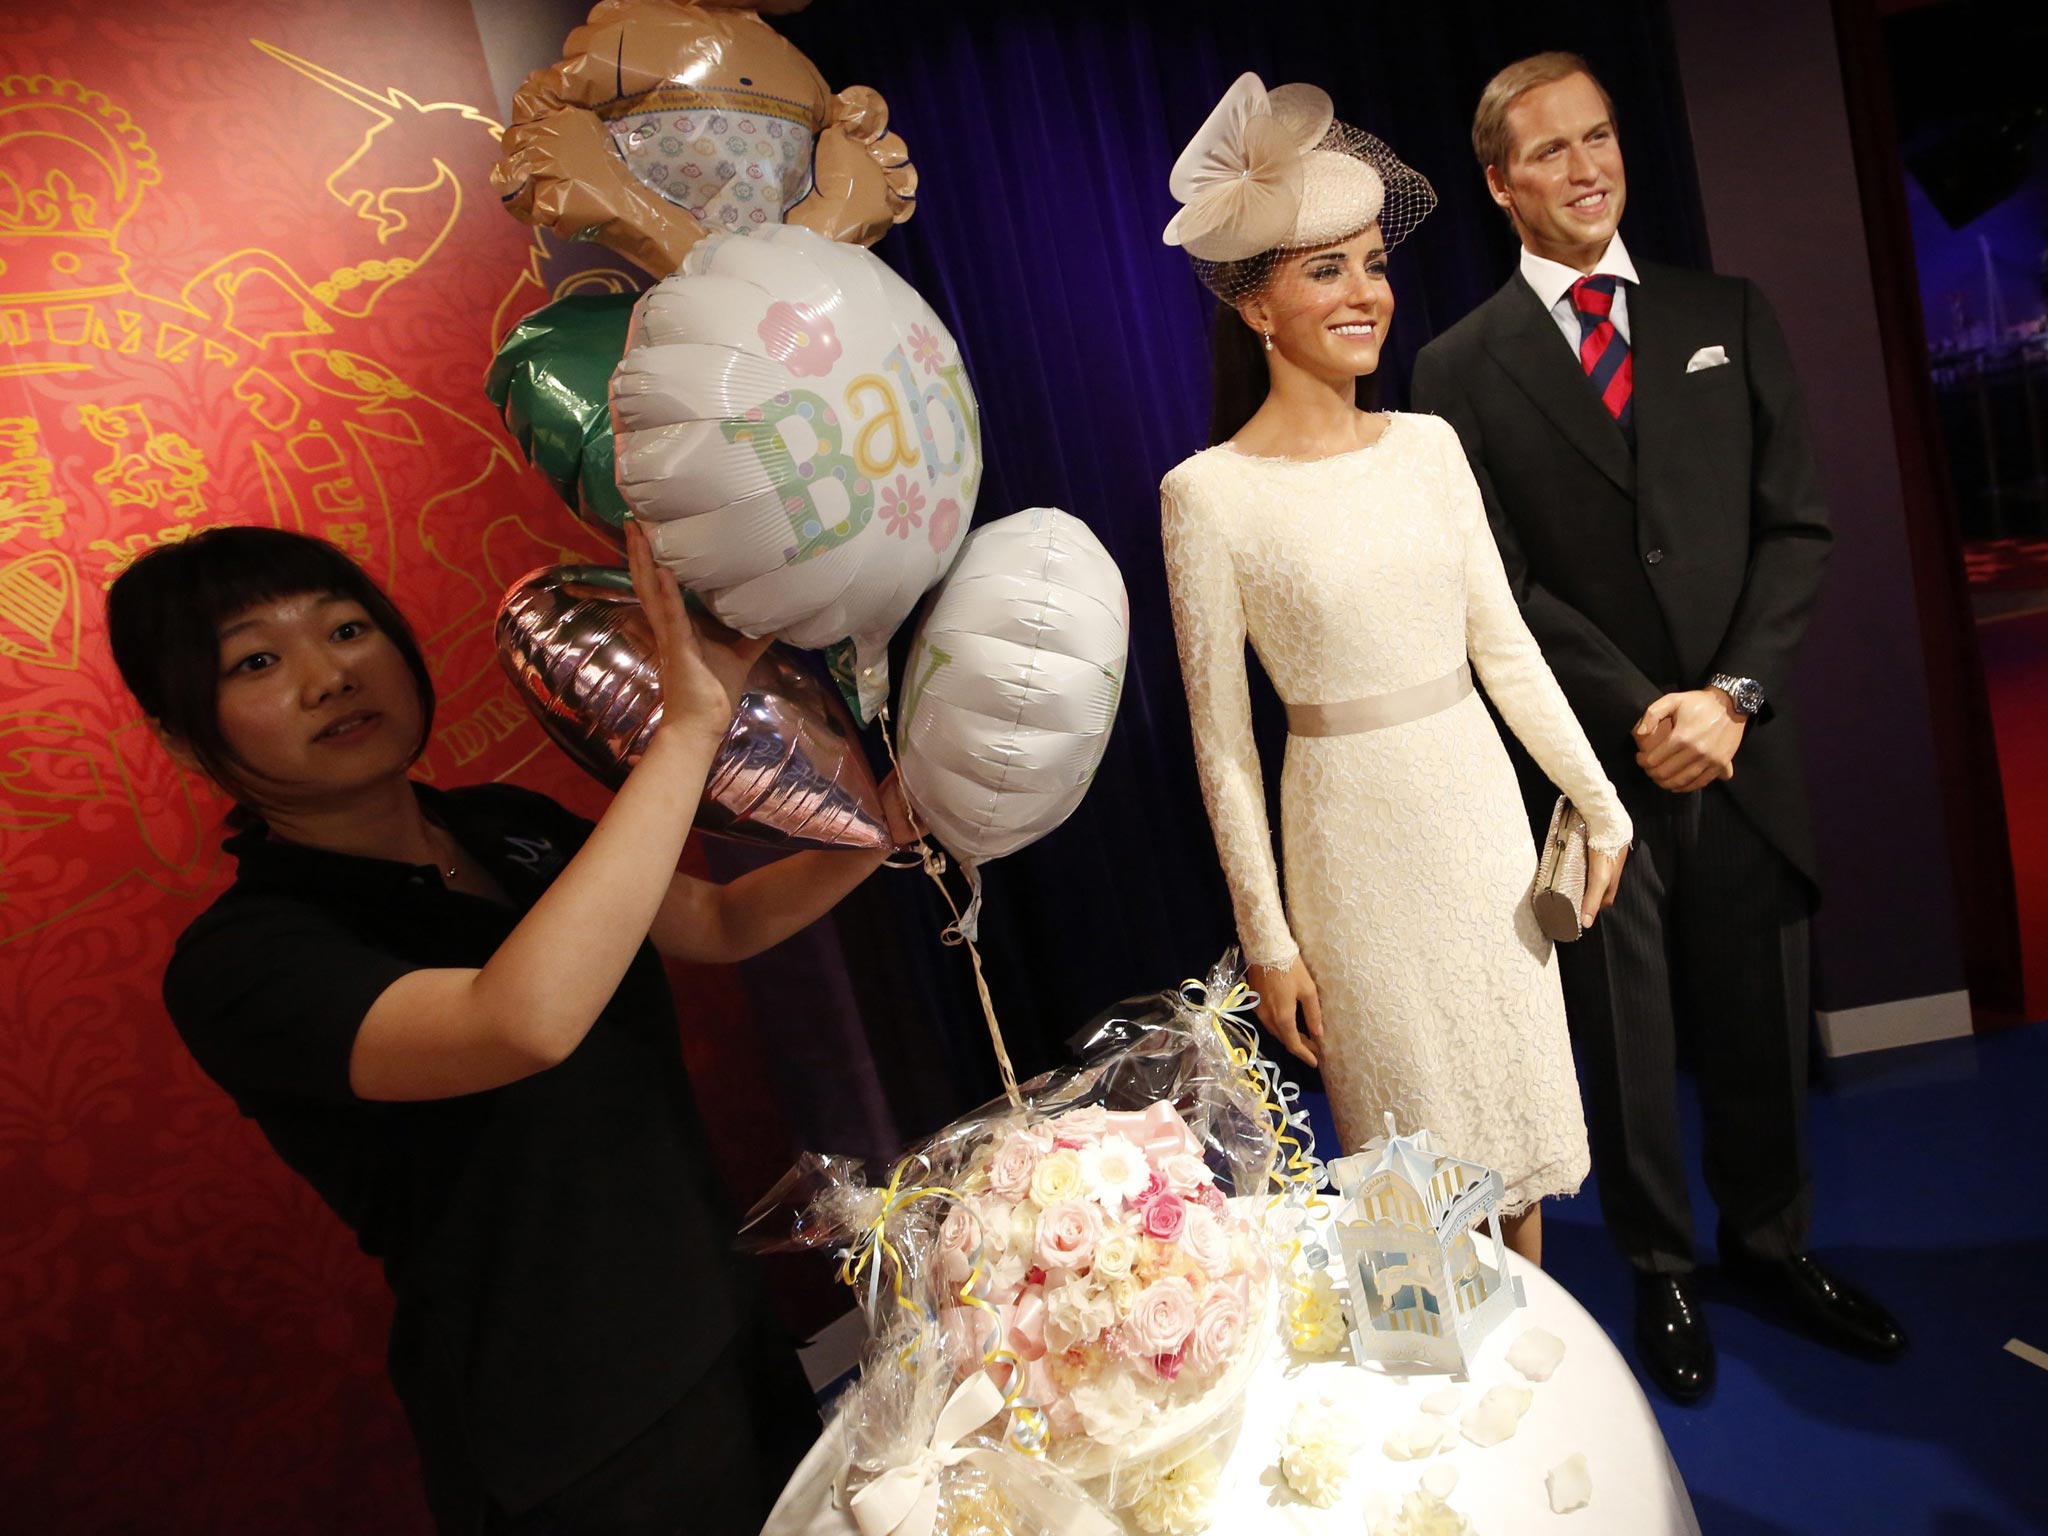 A staff member of the Madame Tussauds Tokyo wax museum prepares decorations next to the wax figures of Britain's Prince William and his wife Catherine